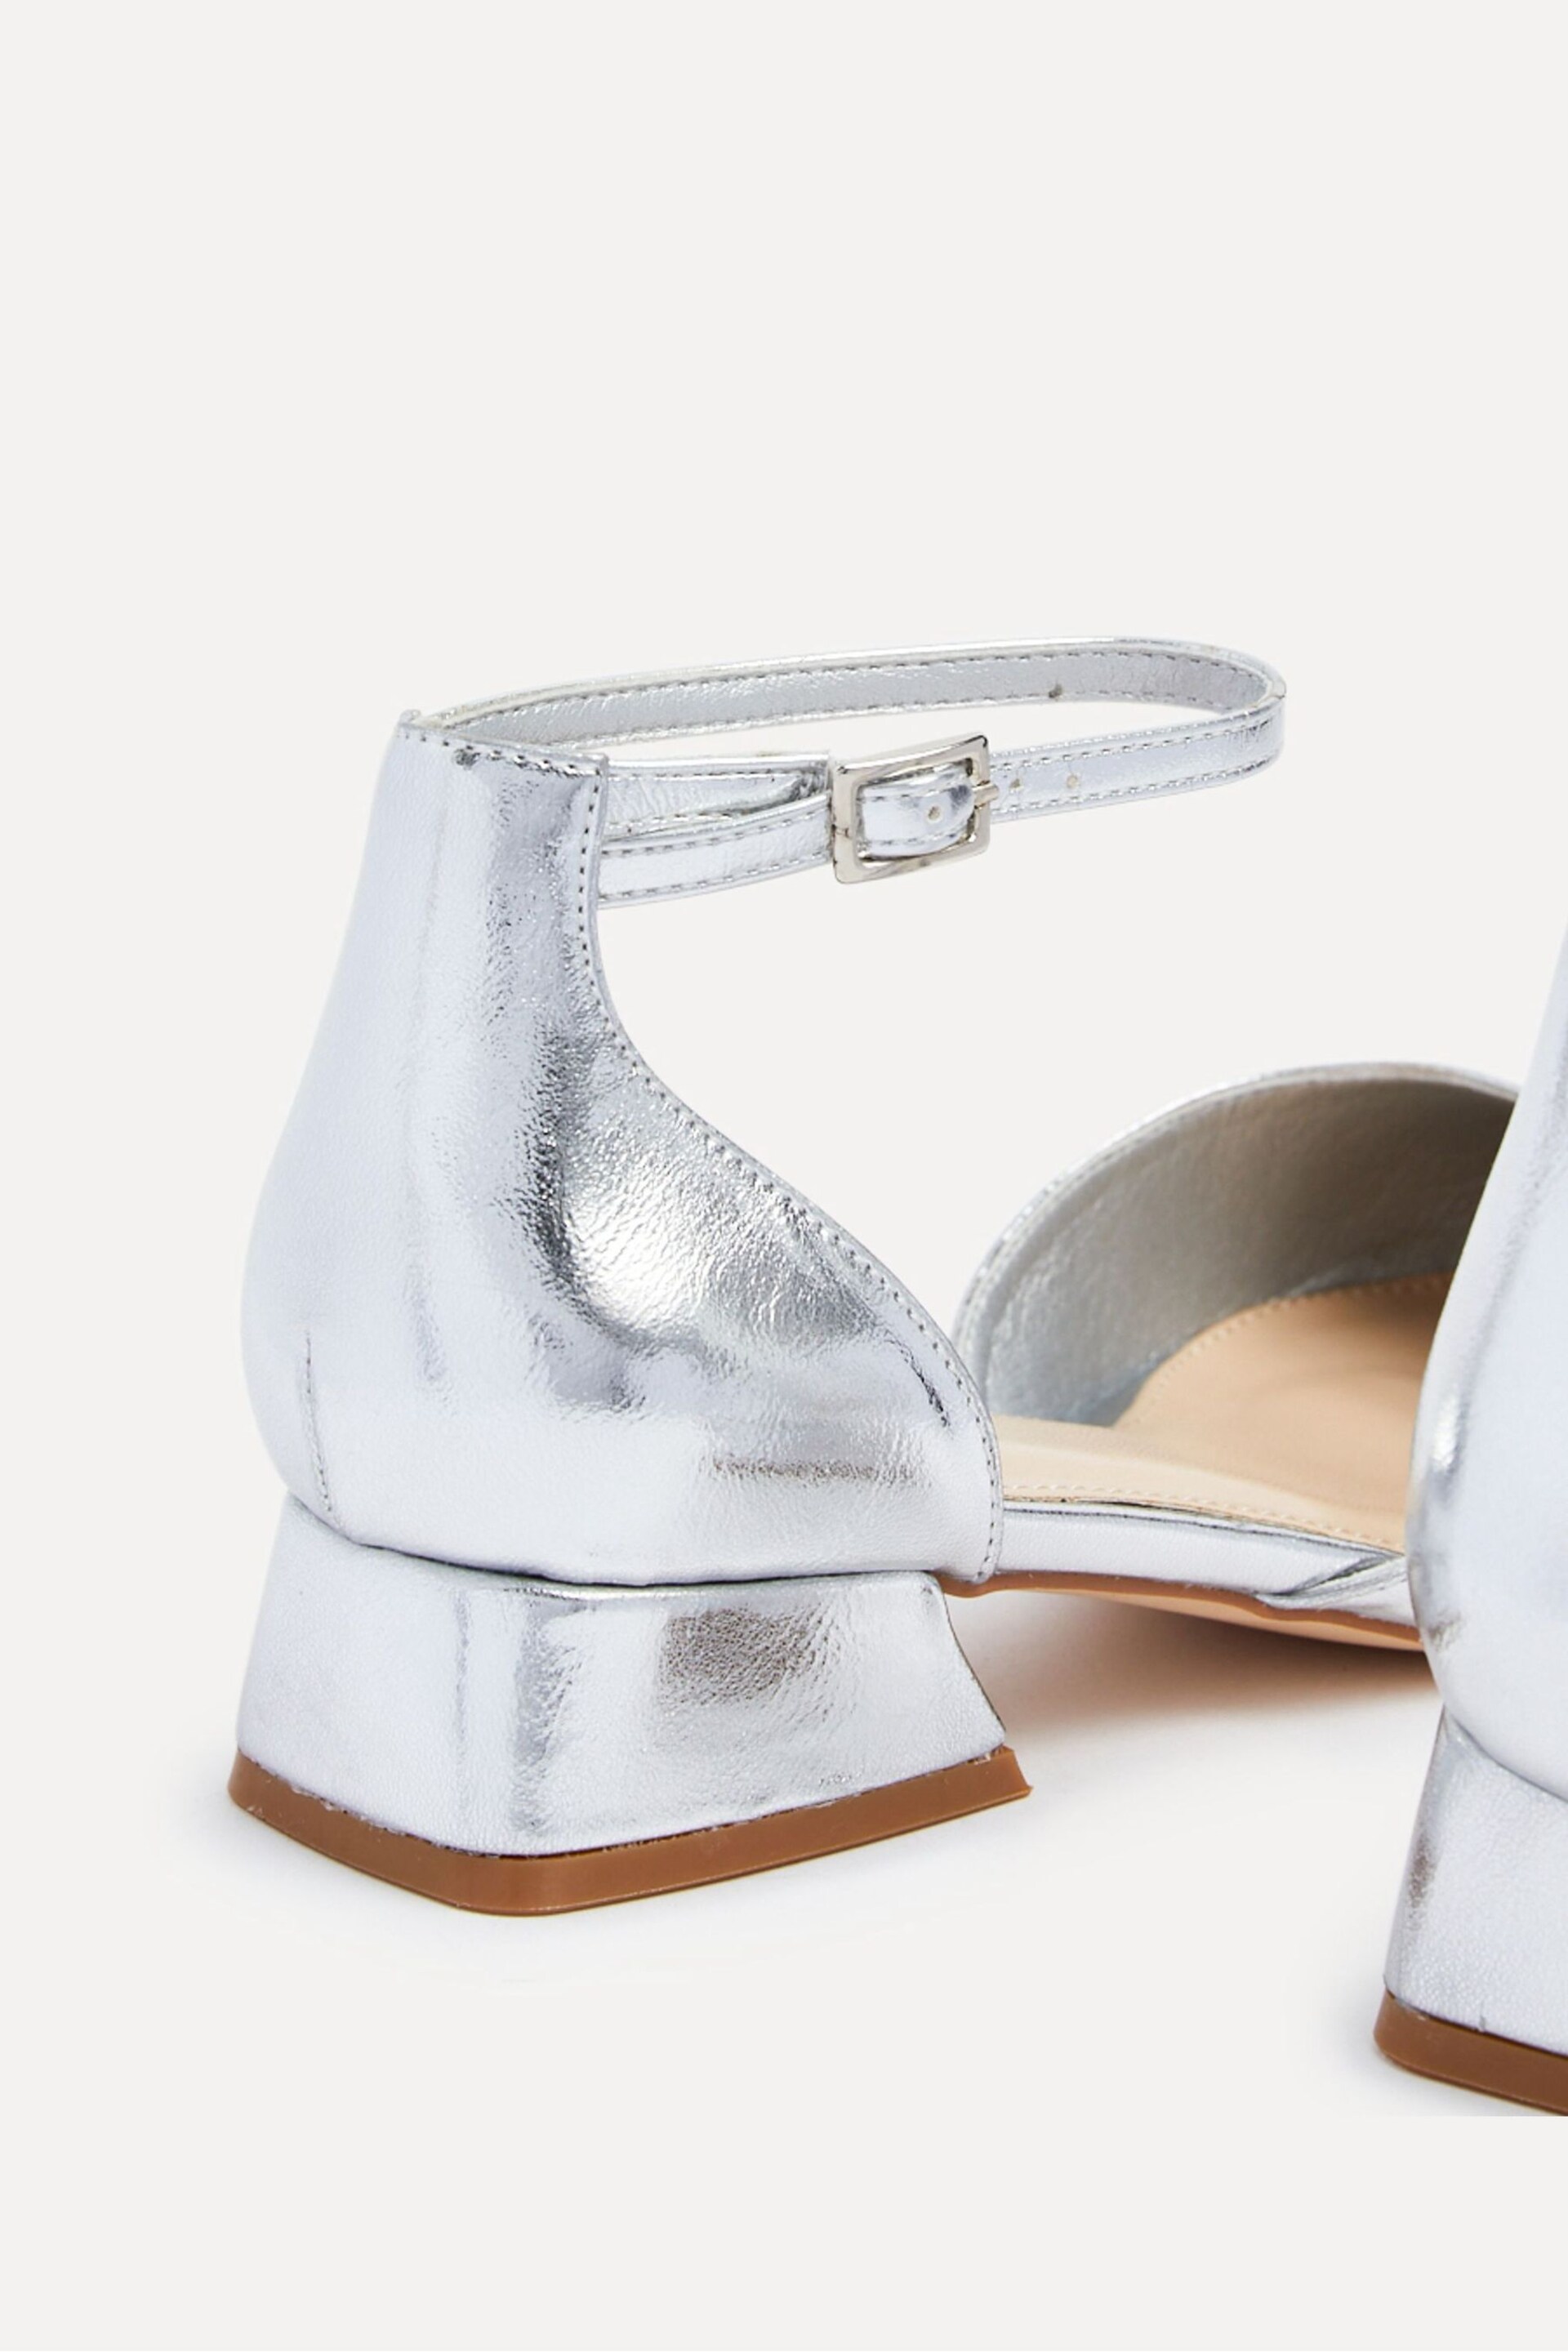 Linzi Silver Dolly Wide Fit Low Block Court Heels - Image 6 of 6